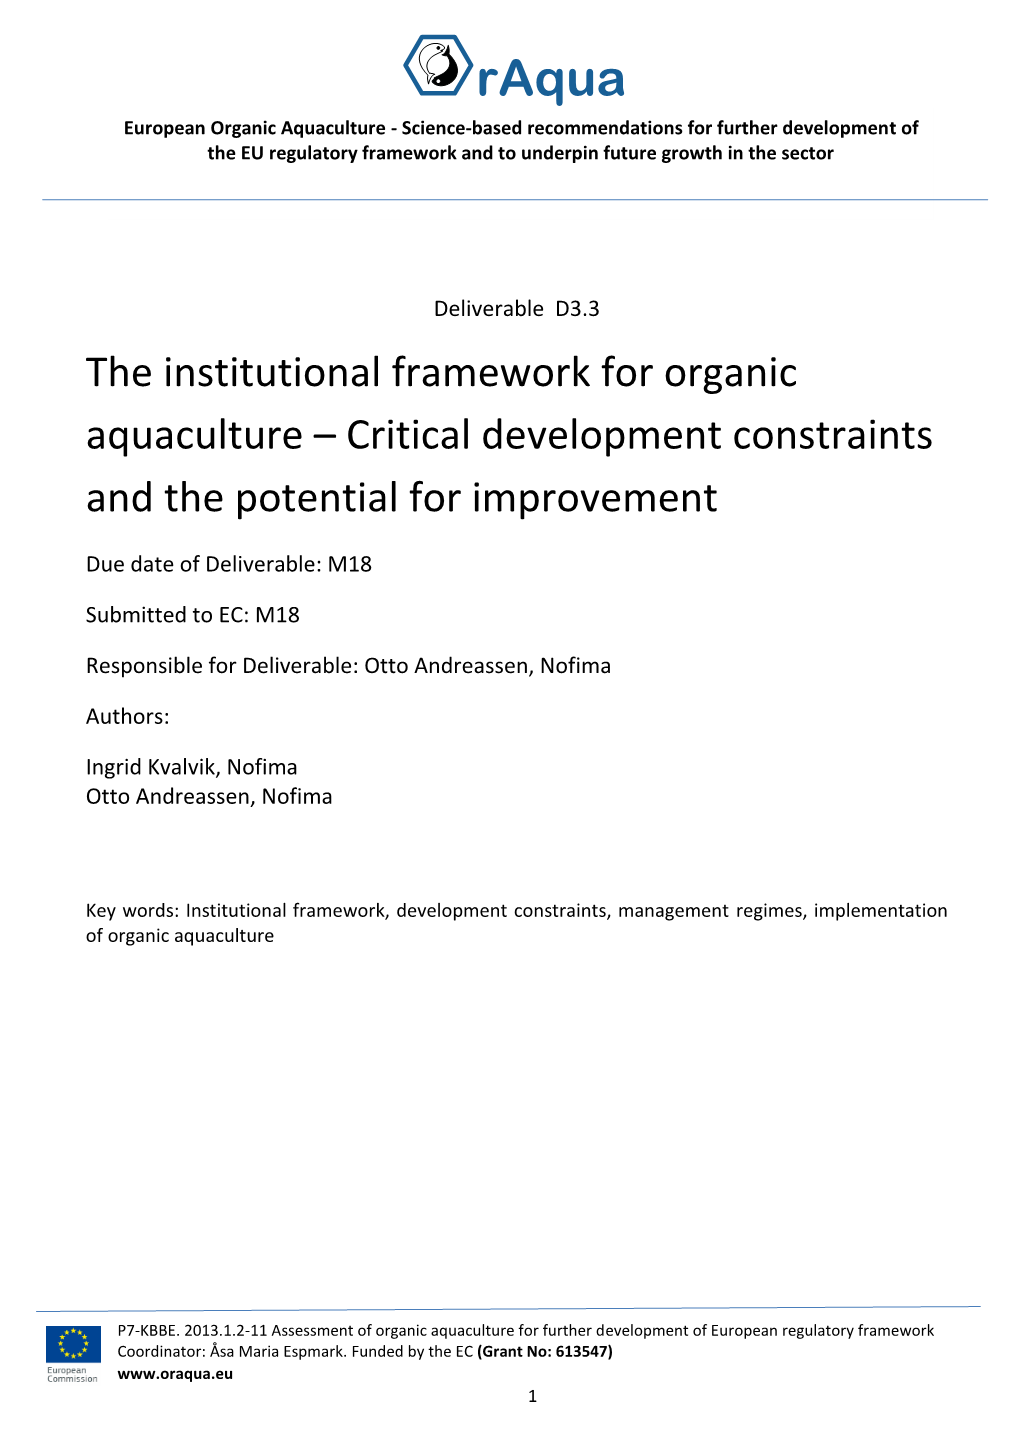 The Institutional Framework for Organic Aquaculture – Critical Development Constraints and the Potential for Improvement